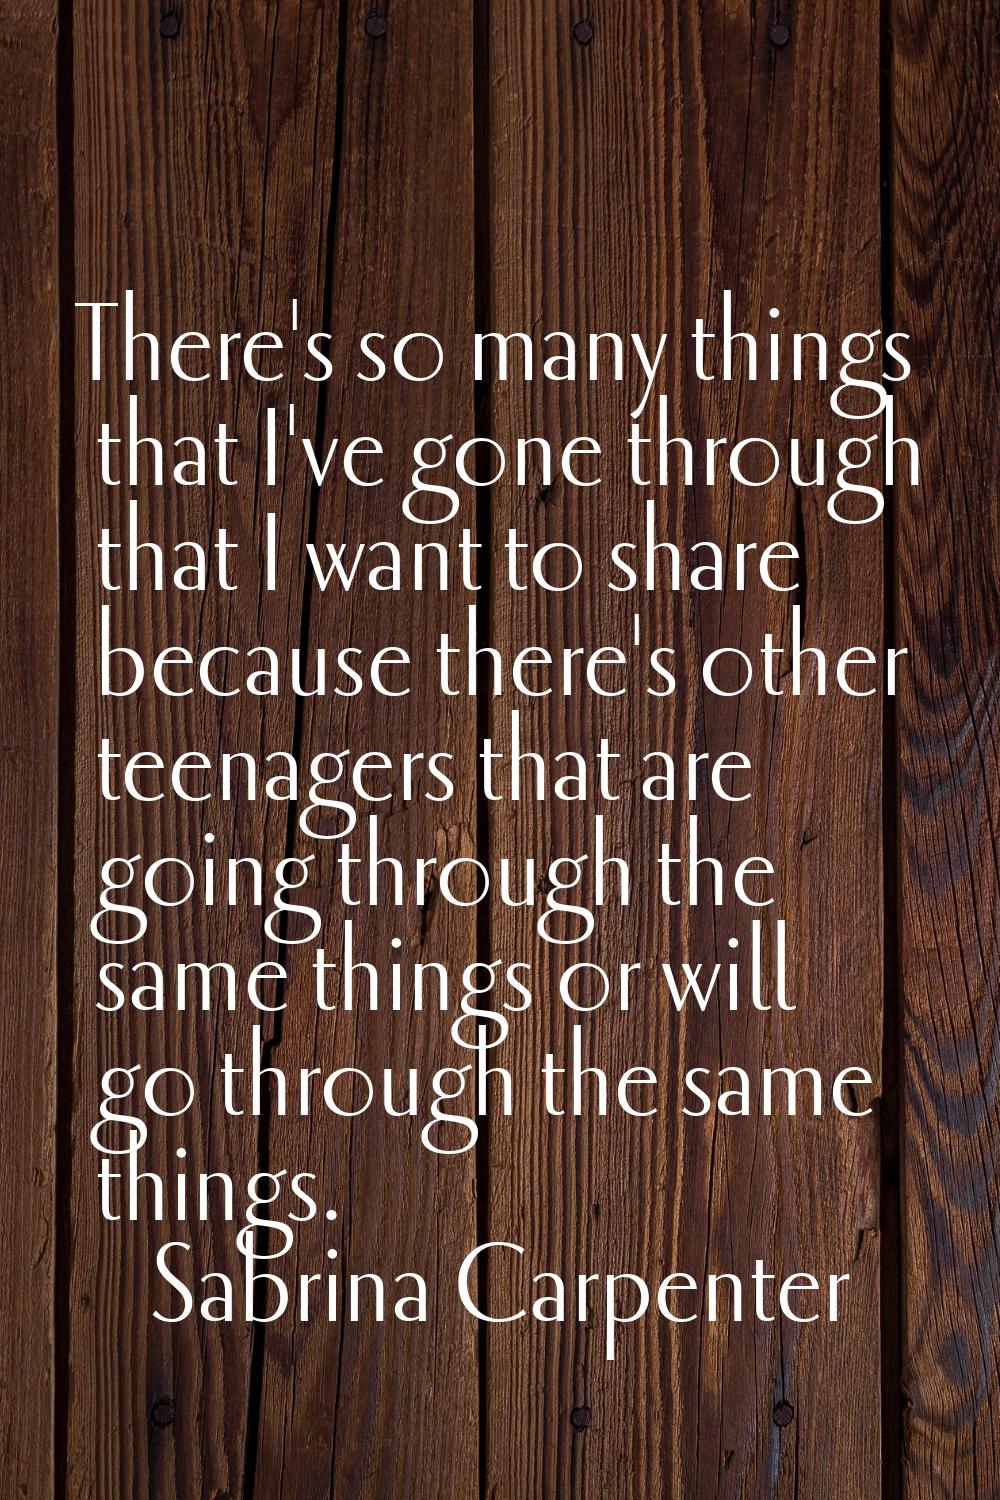 There's so many things that I've gone through that I want to share because there's other teenagers 